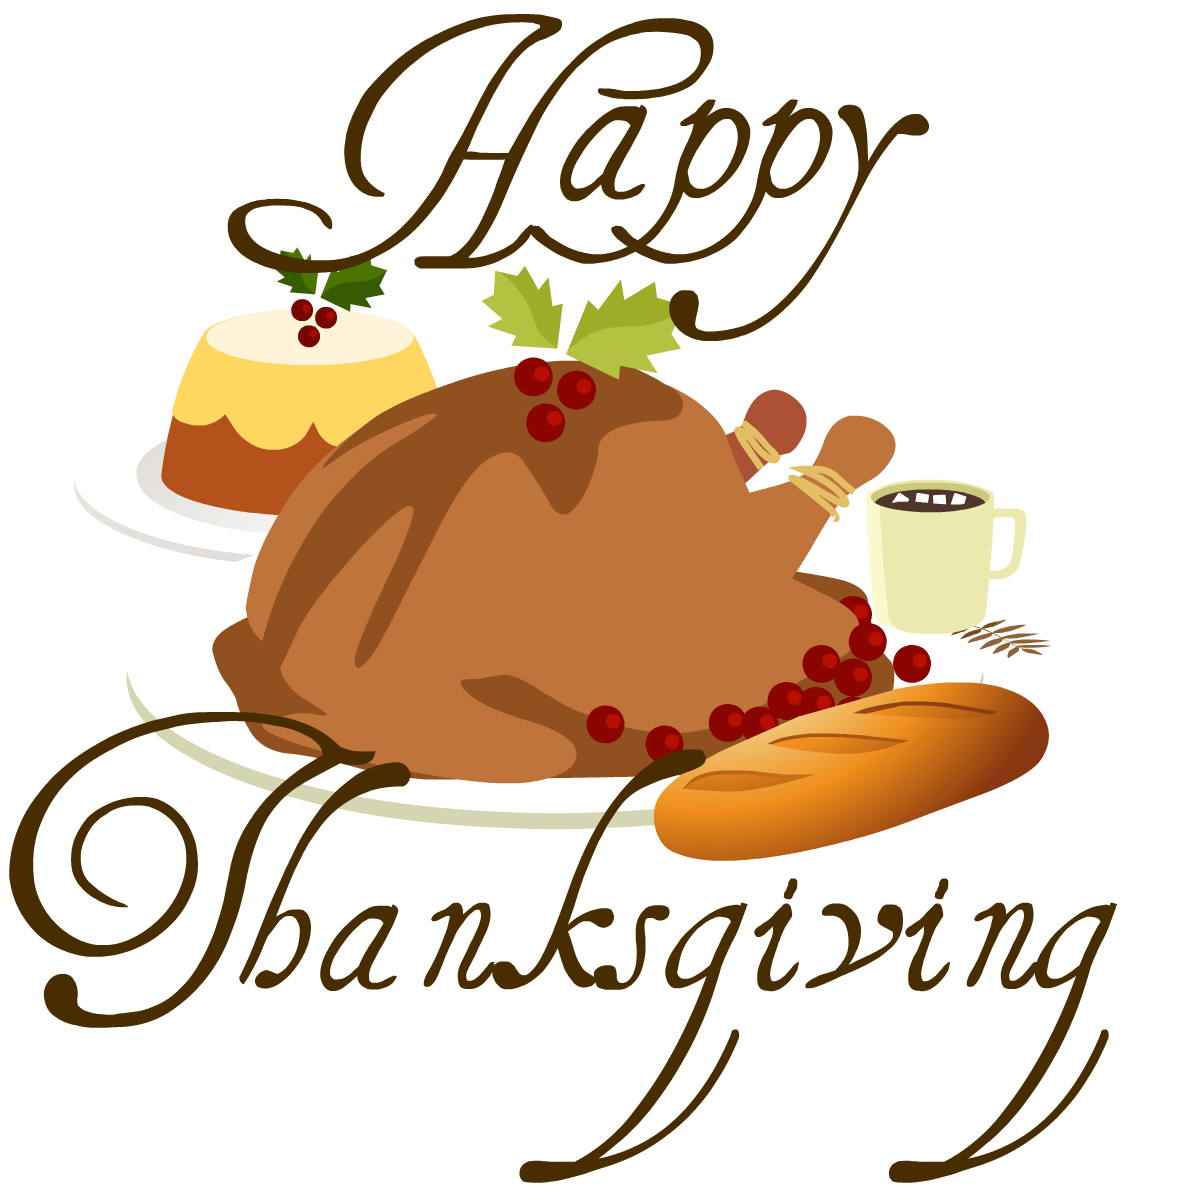 17 Thanks Giving Pics Free Cliparts That You Can Download To You